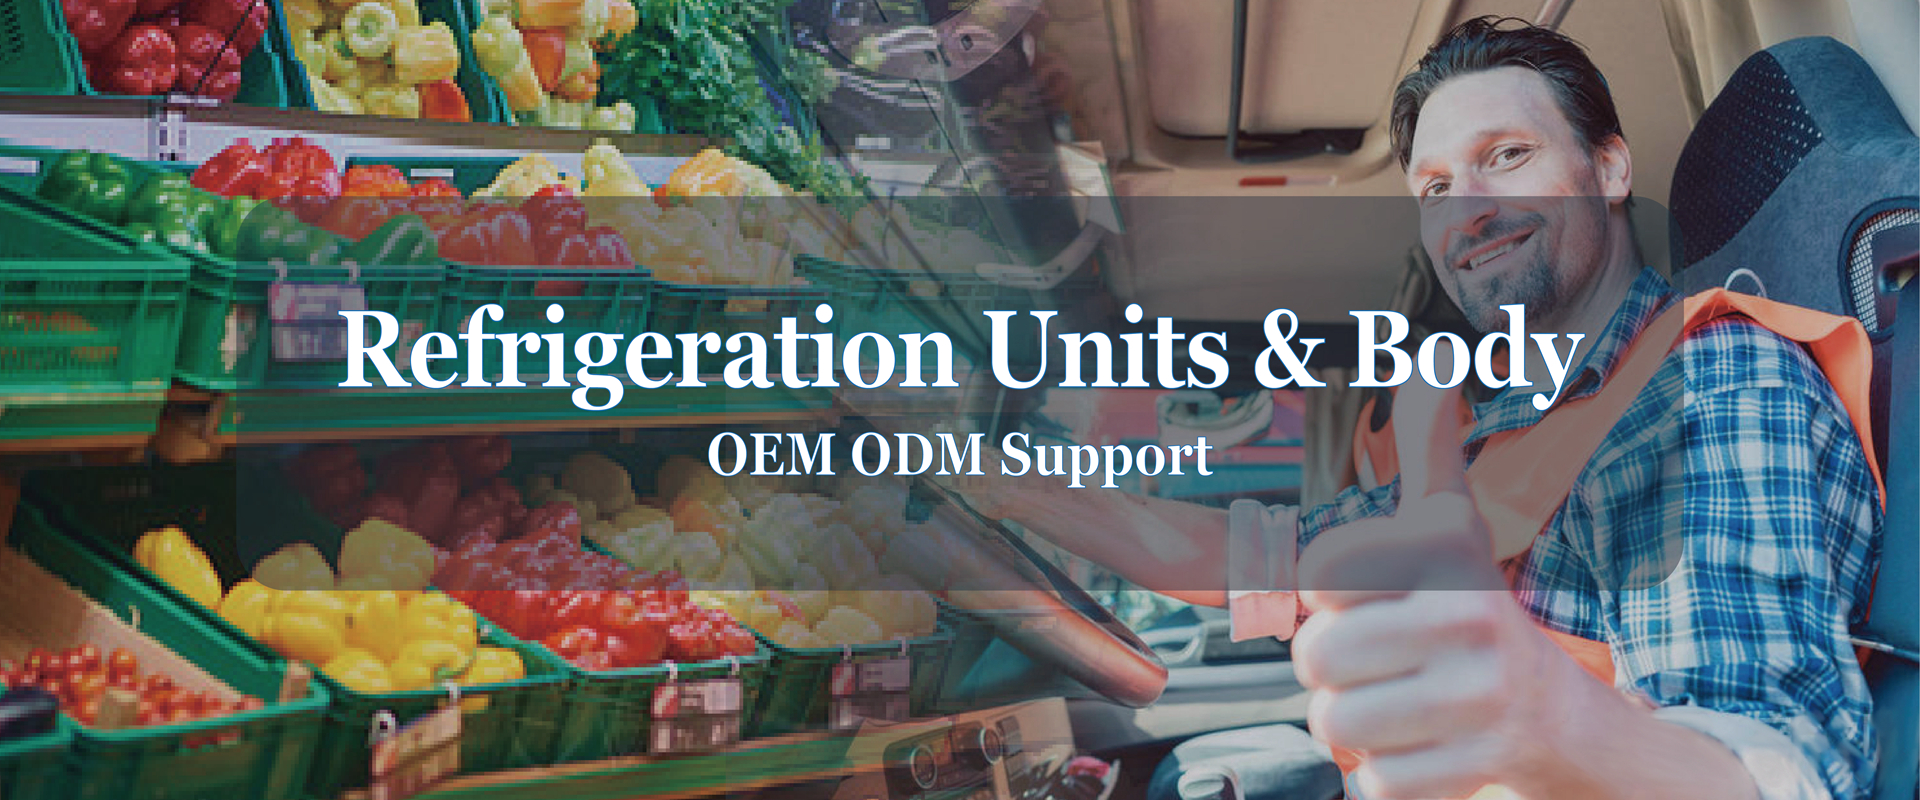 One-Stop Service for Refrigerated body and Refrigeration Units